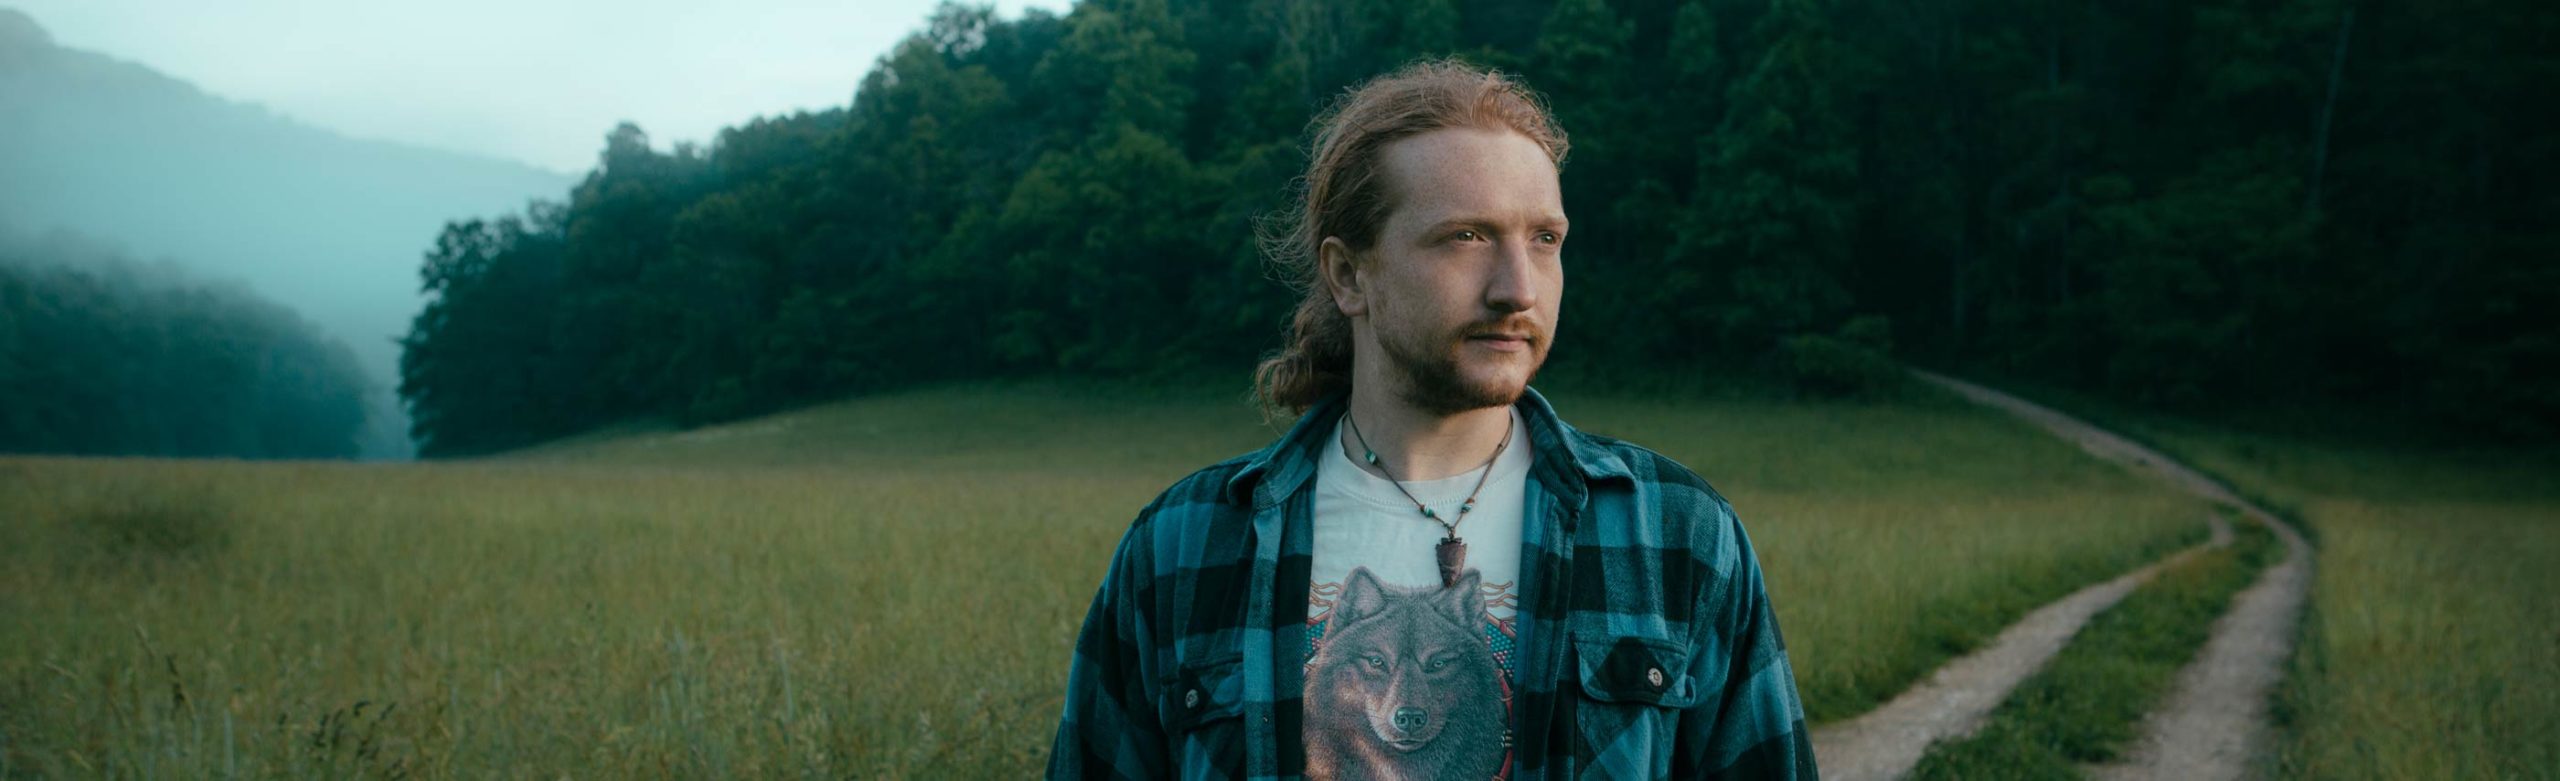 JUST ANNOUNCED: Southern Singer-Songwriter Tyler Childers to Play Headlining Concert in Missoula Image